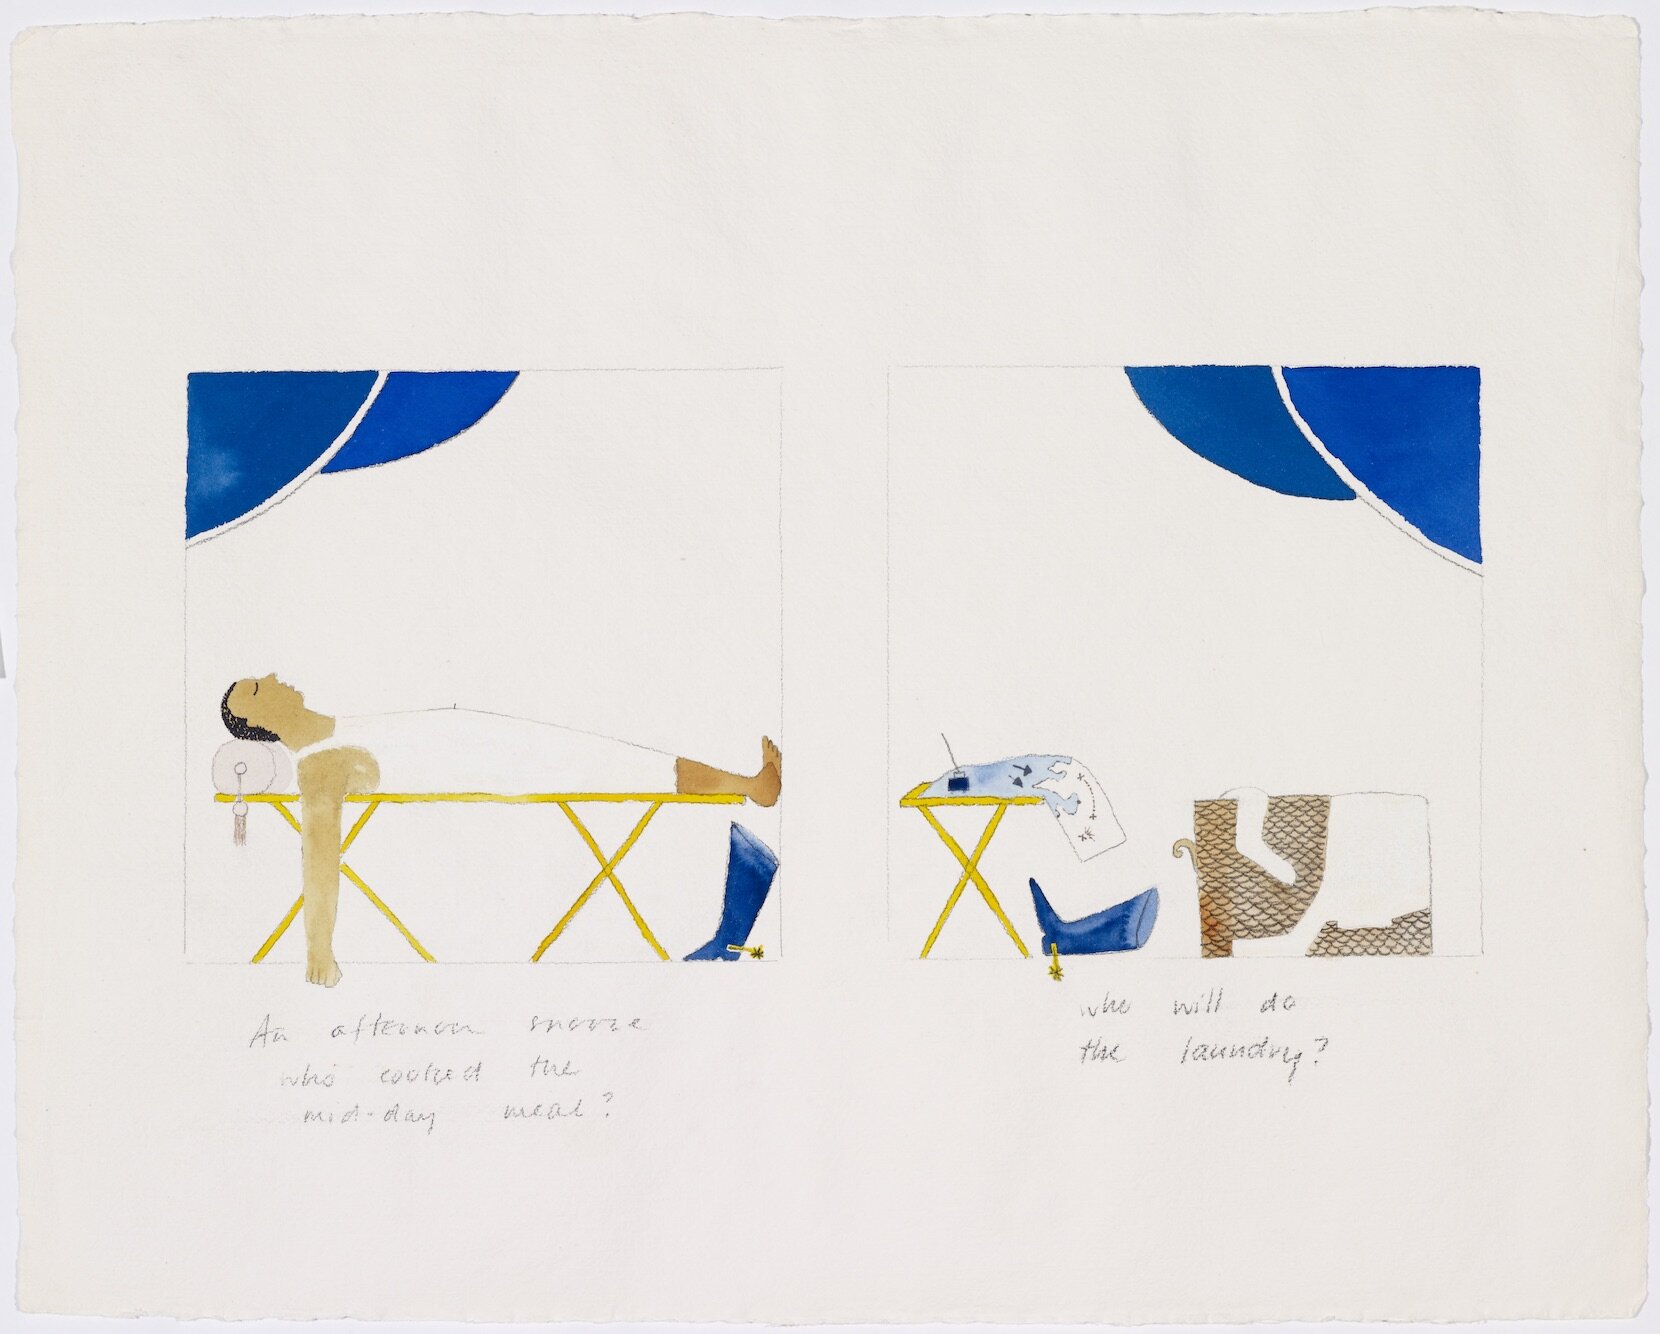 Lubaina Himid, Scenes from the Life of Toussaint L'Ouverture: 2 (1987), watercolour and pencil on paper, 39.5 x 50 cm. Arts Council Collection, Southbank Centre, London © Lubaina Himid.